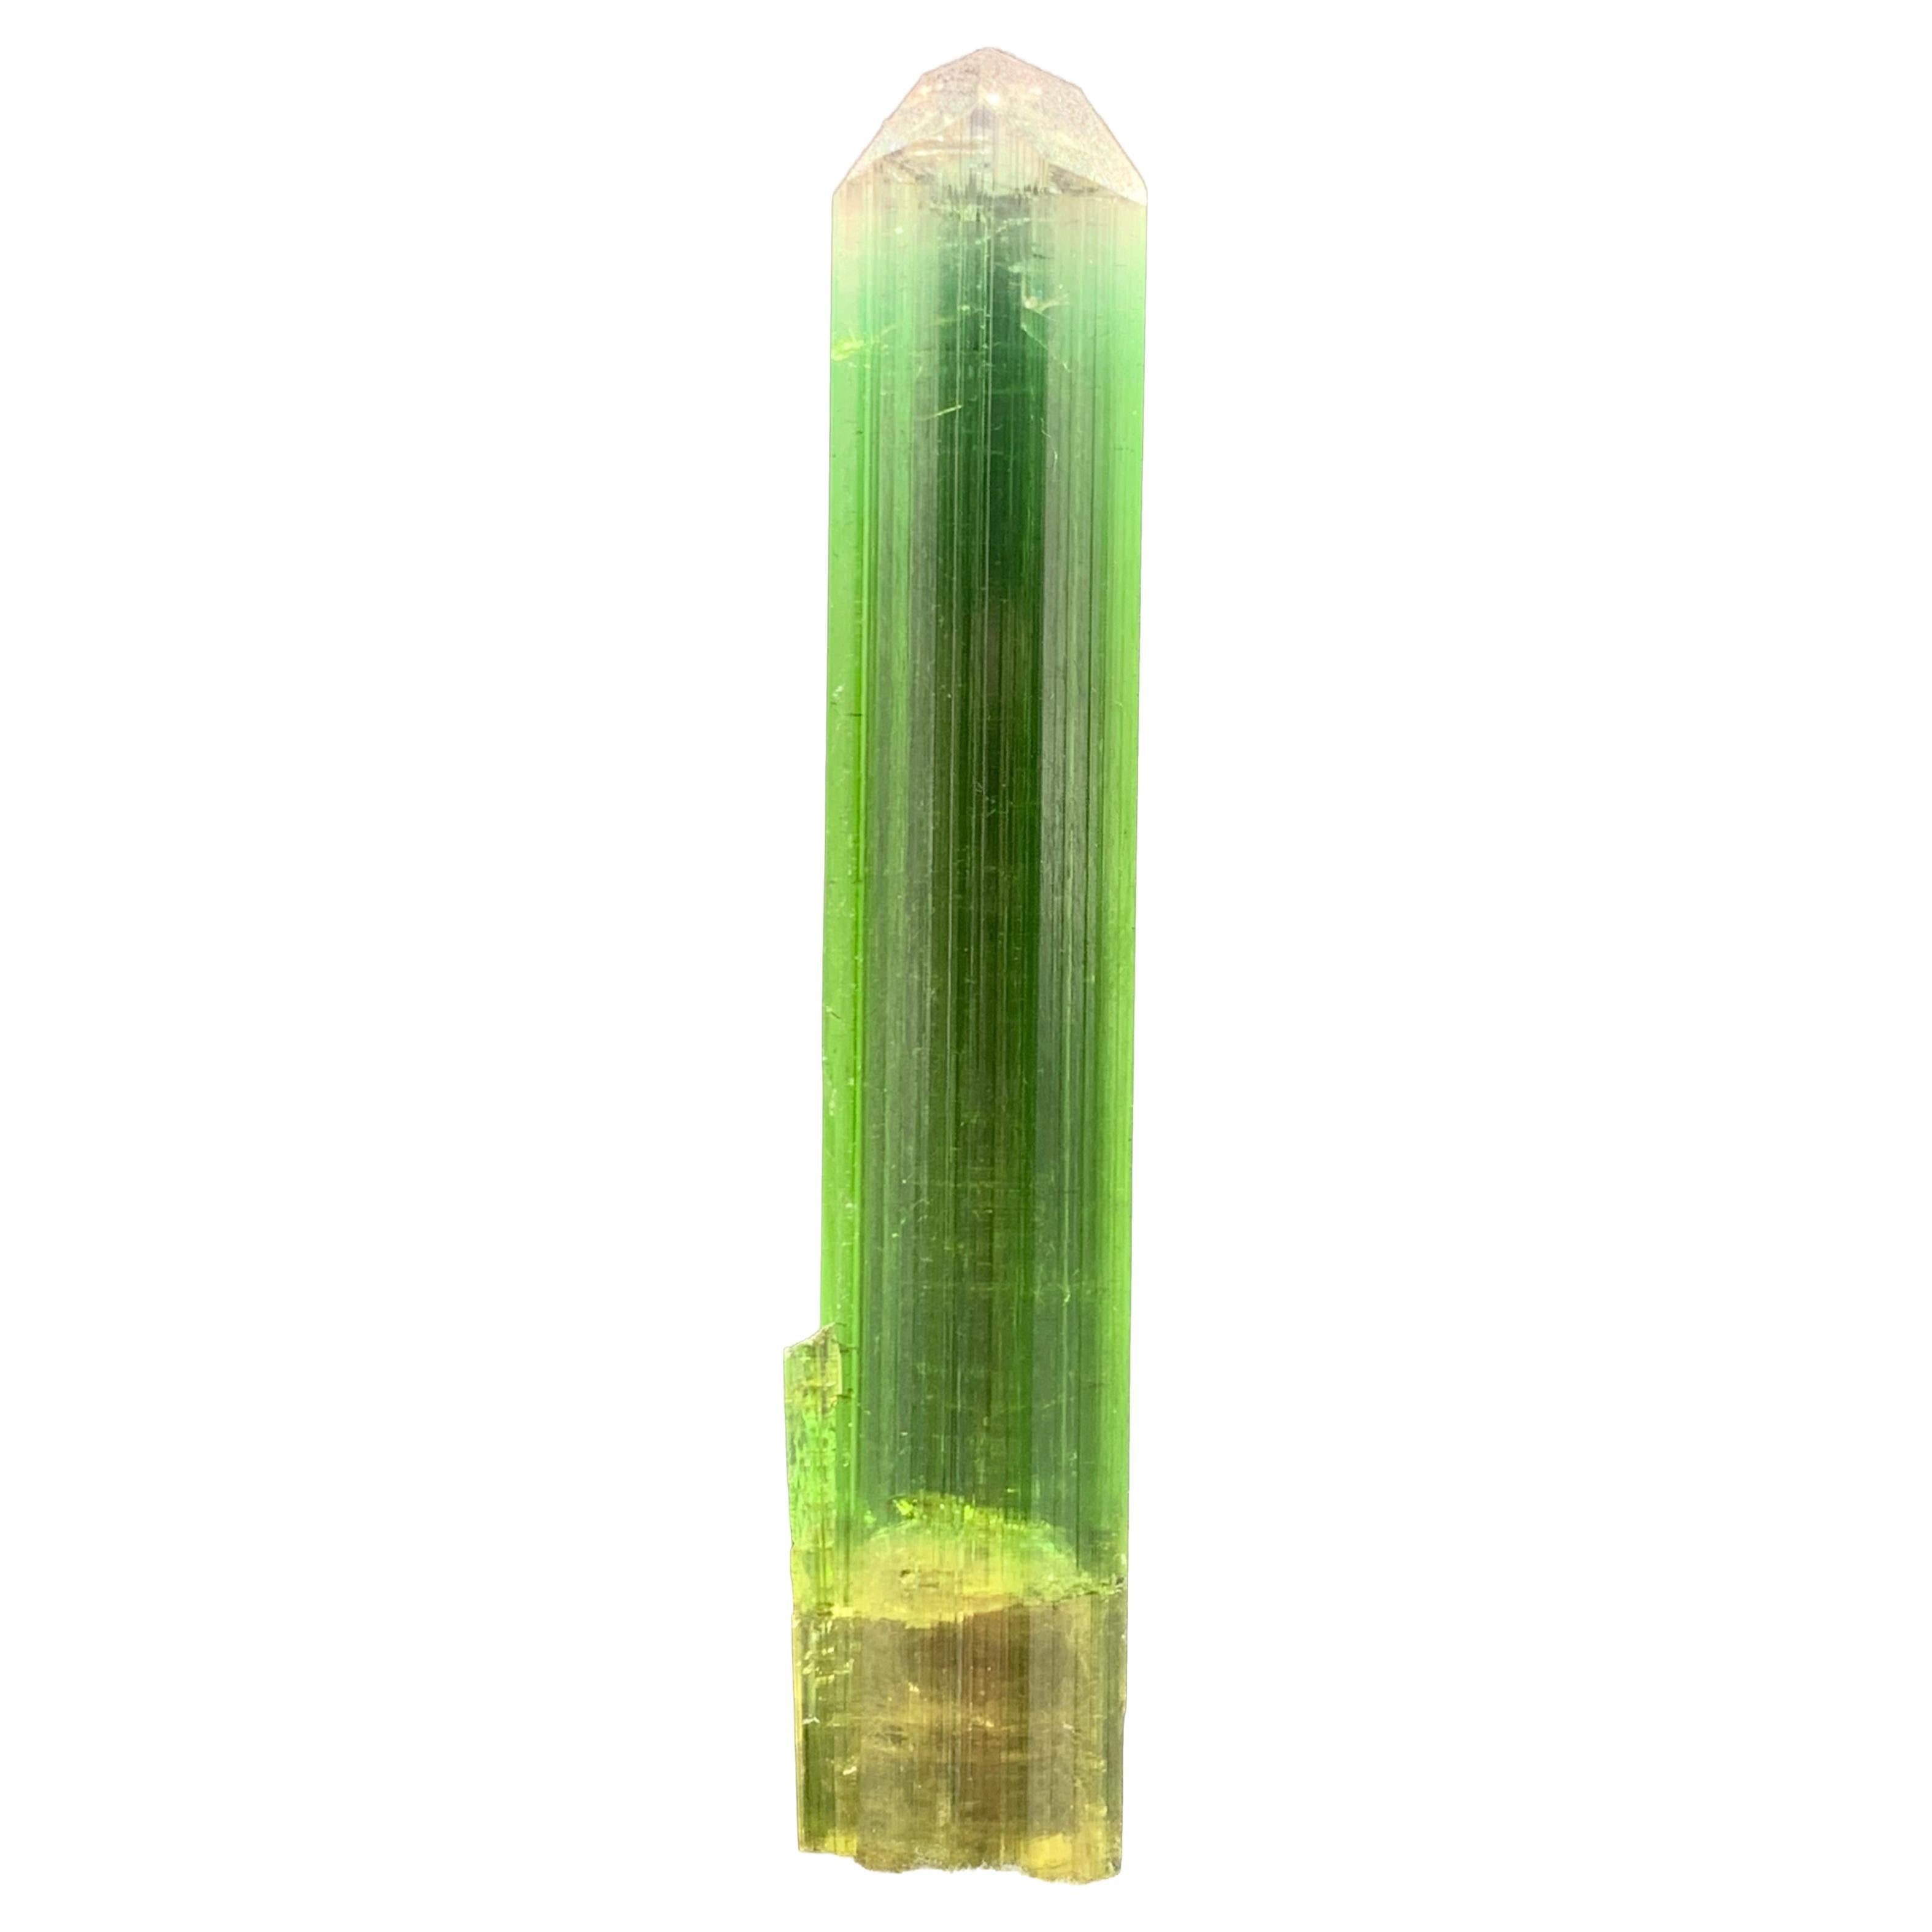 54.90 Cts Beautiful Tri Color Tourmaline Crystal From Paprook, Afghanistan 